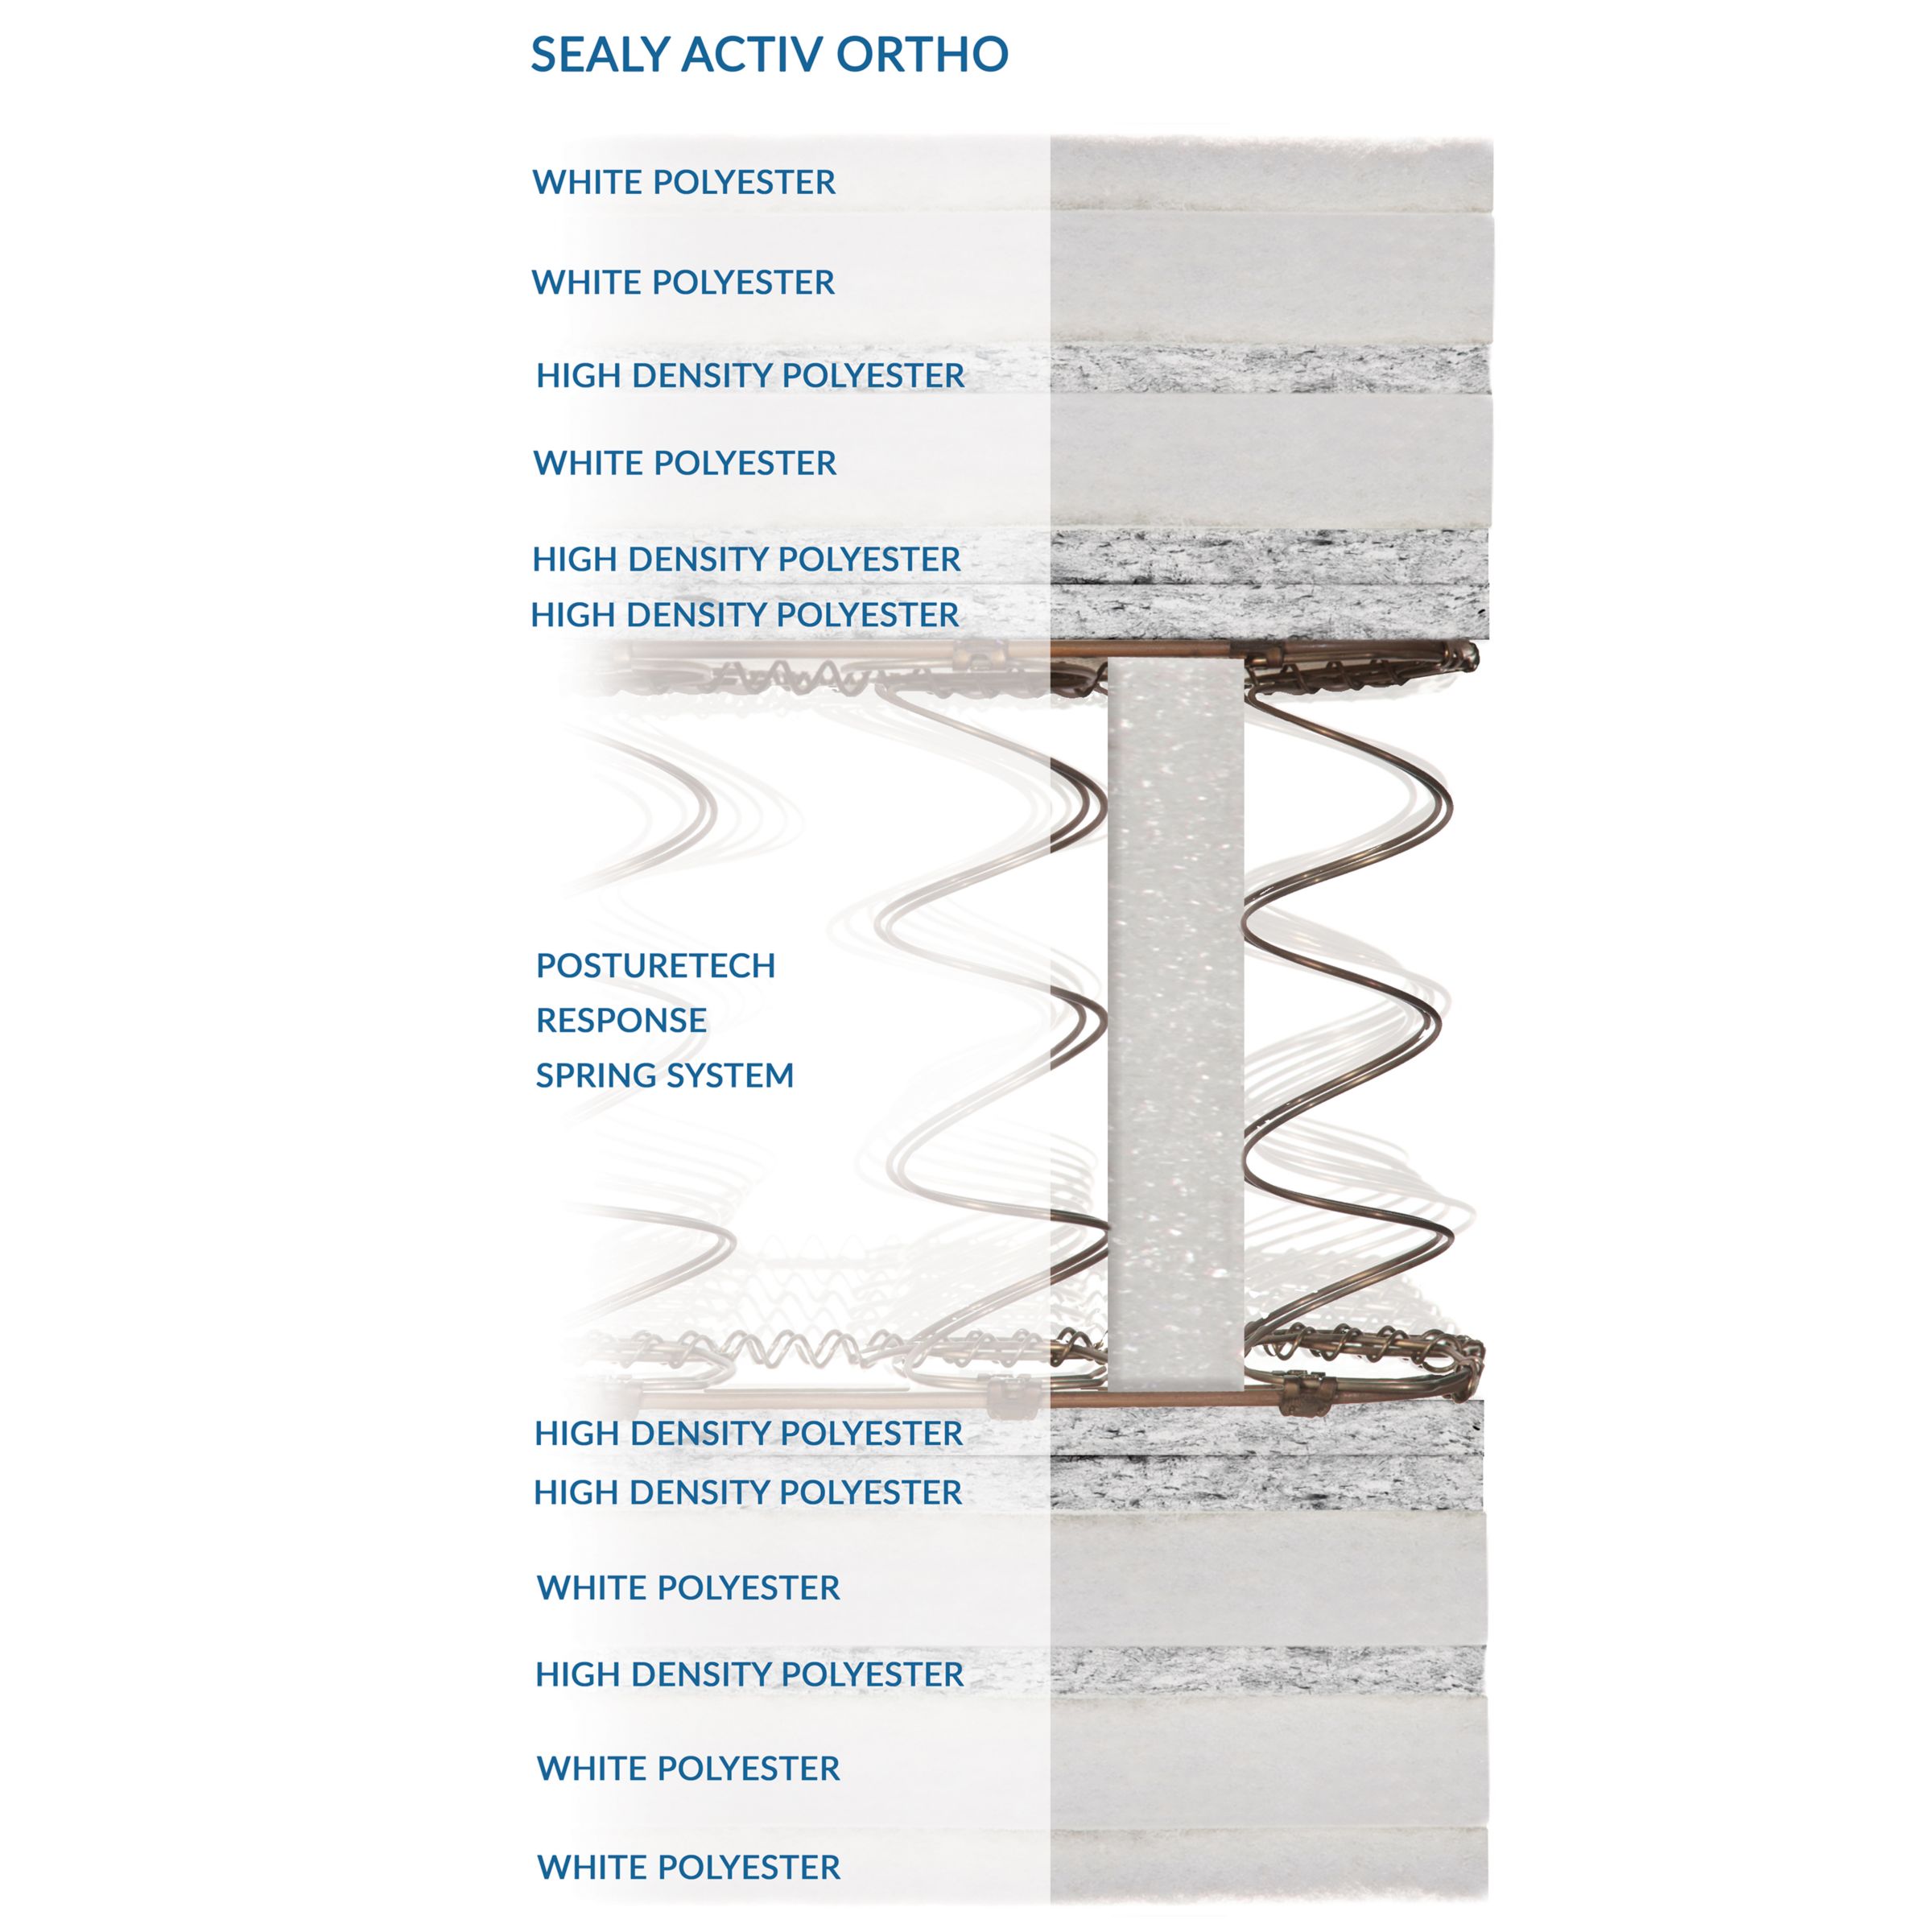 Sealy Activsleep Ortho Mattress, Firm, Super King Size at